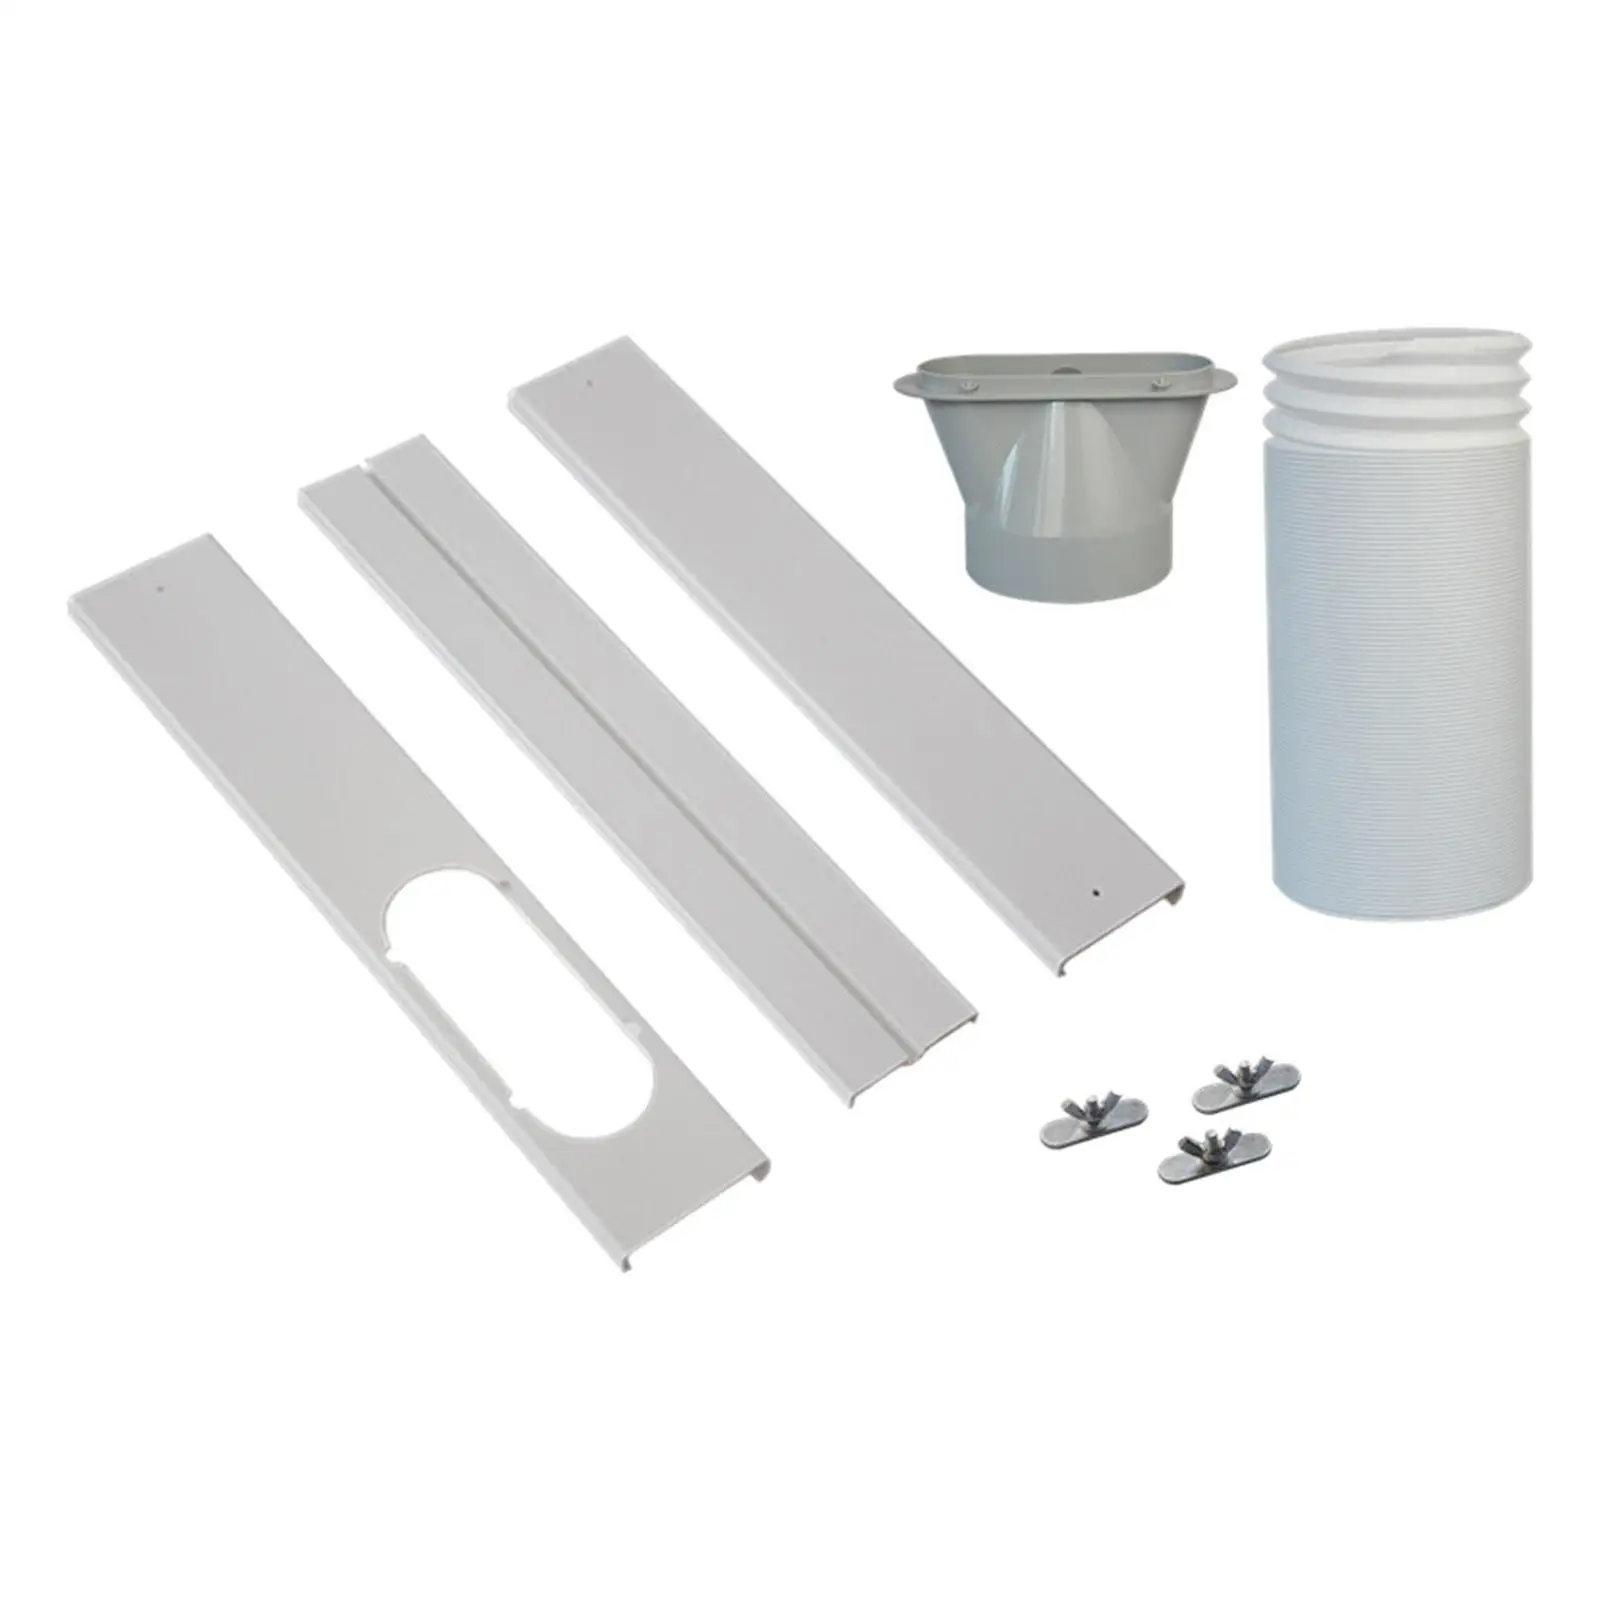 Air Conditioner Window Seal kit, 5Pcs Window Plate Kit, Flexible Exhaust Hose, Easy to Install, Air Conditioner Pipe Set